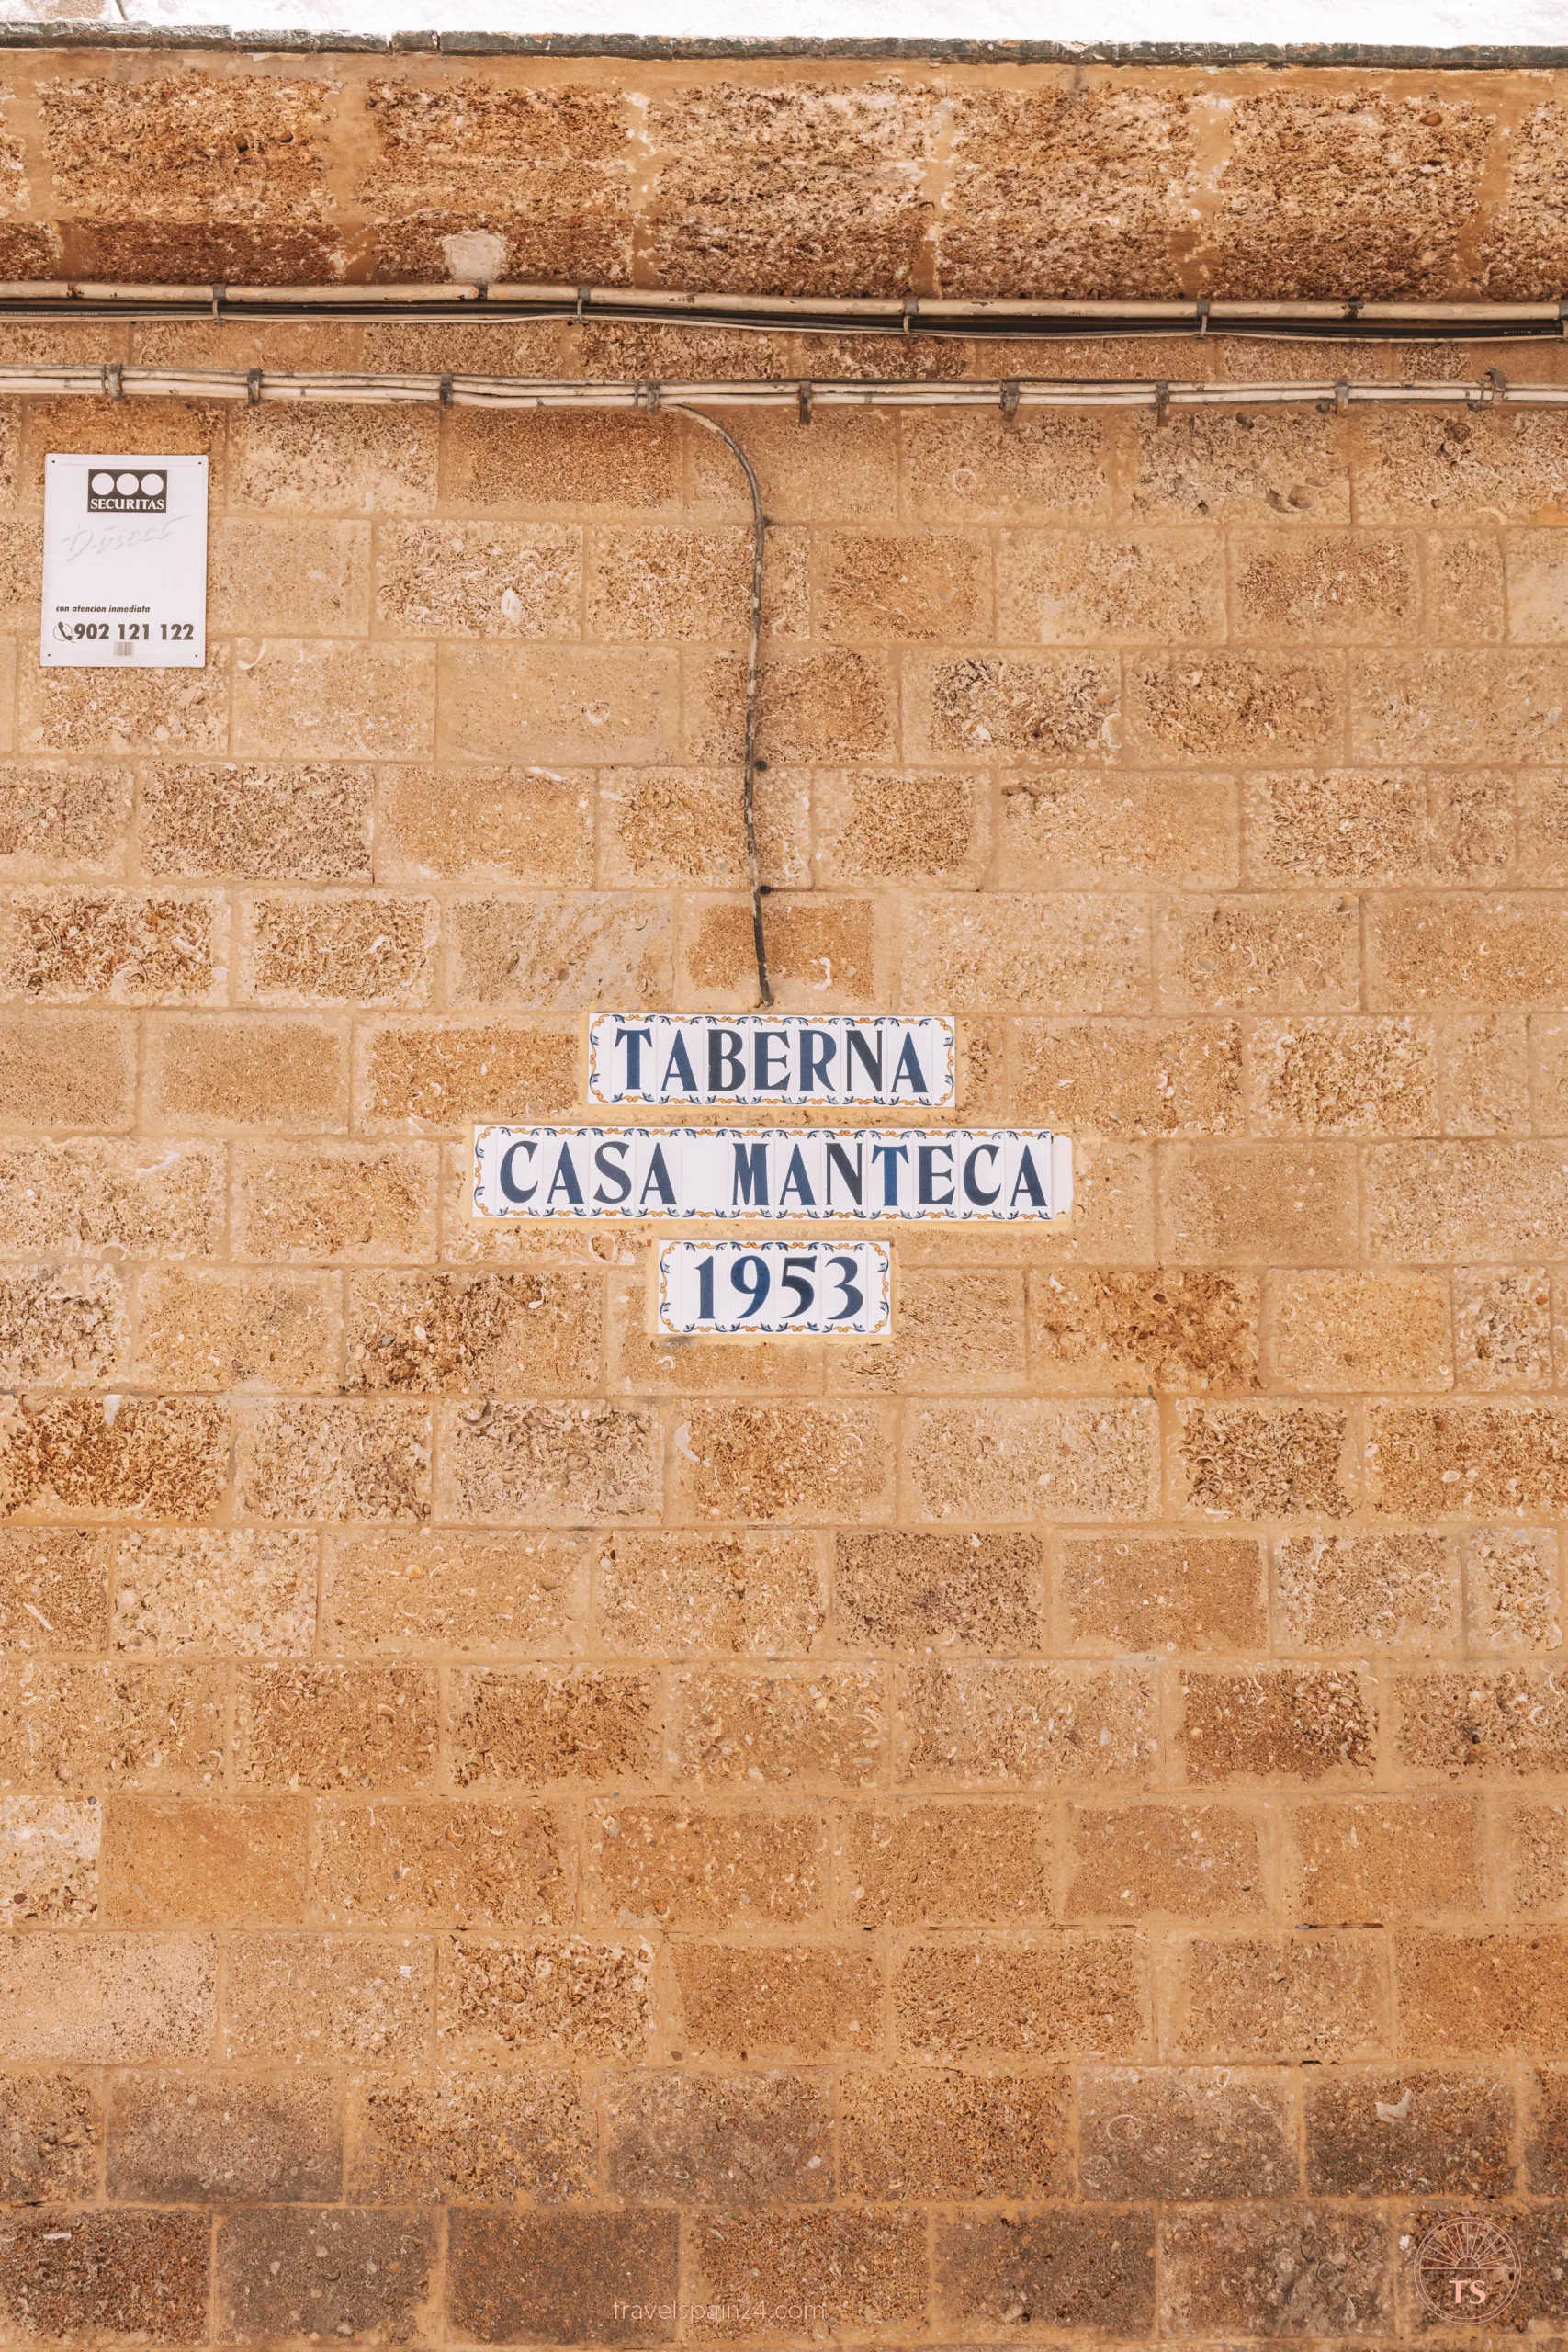 Close-up of the tiles displaying the name of Taberna Casa Manteca on the wall in Cadiz. This detail is one of the Cadiz highlights, showcasing the traditional charm of the local dining scene.
